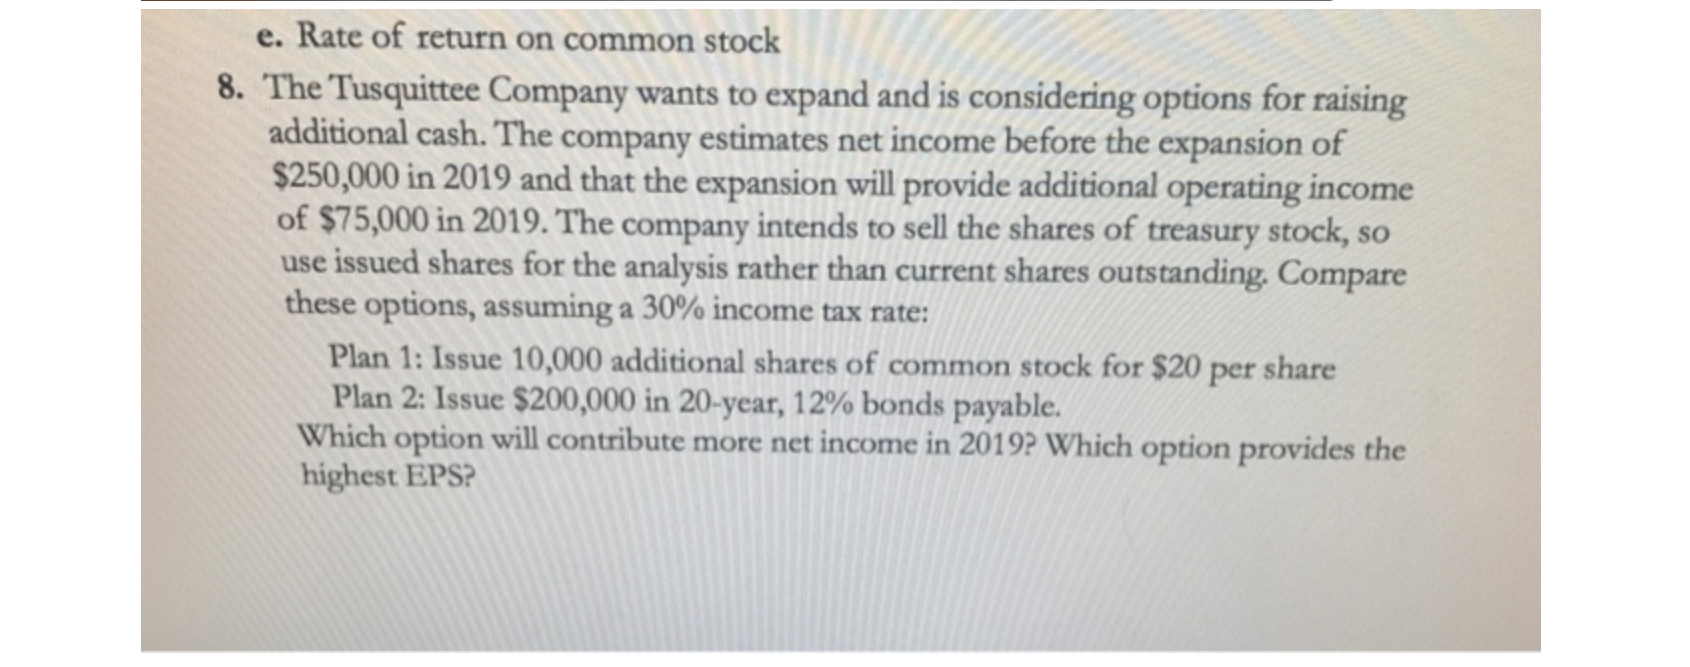 e. Rate of return on common stock
8. The Tusquittee Company wants to expand and is considering options for raising
additional cash. The company estimates net income before the expansion of
$250,000 in 2019 and that the expansion will provide additional operating income
of $75,000 in 2019. The company intends to sell the shares of treasury stock, so
use issued shares for the analysis rather than current shares outstanding. Compare
these options, assuming a 30% income tax rate:
Plan 1: Issue 10,000 additional shares of common stock for $20 per share
Plan 2: Issue $200,000 in 20-year, 12% bonds payable.
Which option will contribute more net income in 2019? Which option provides the
highest EPS?
